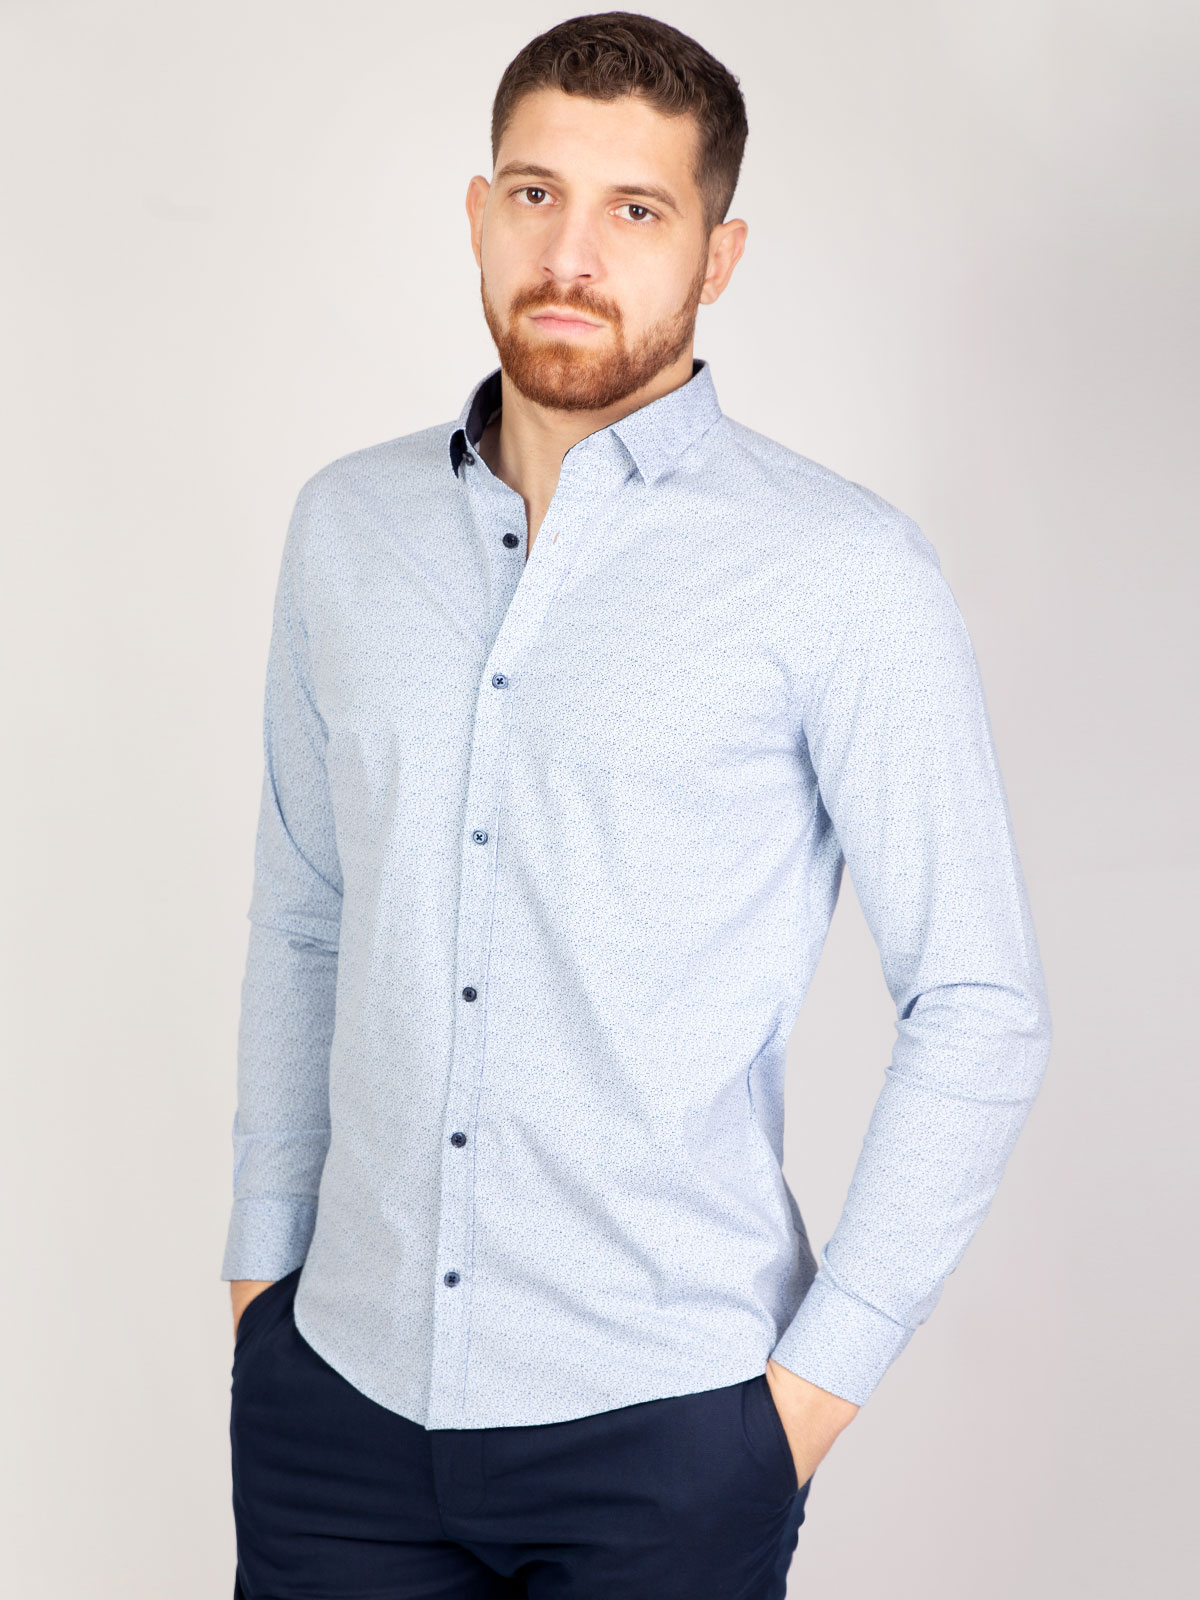  light blue shirt with small dots  - 21483 € 34.90 img3